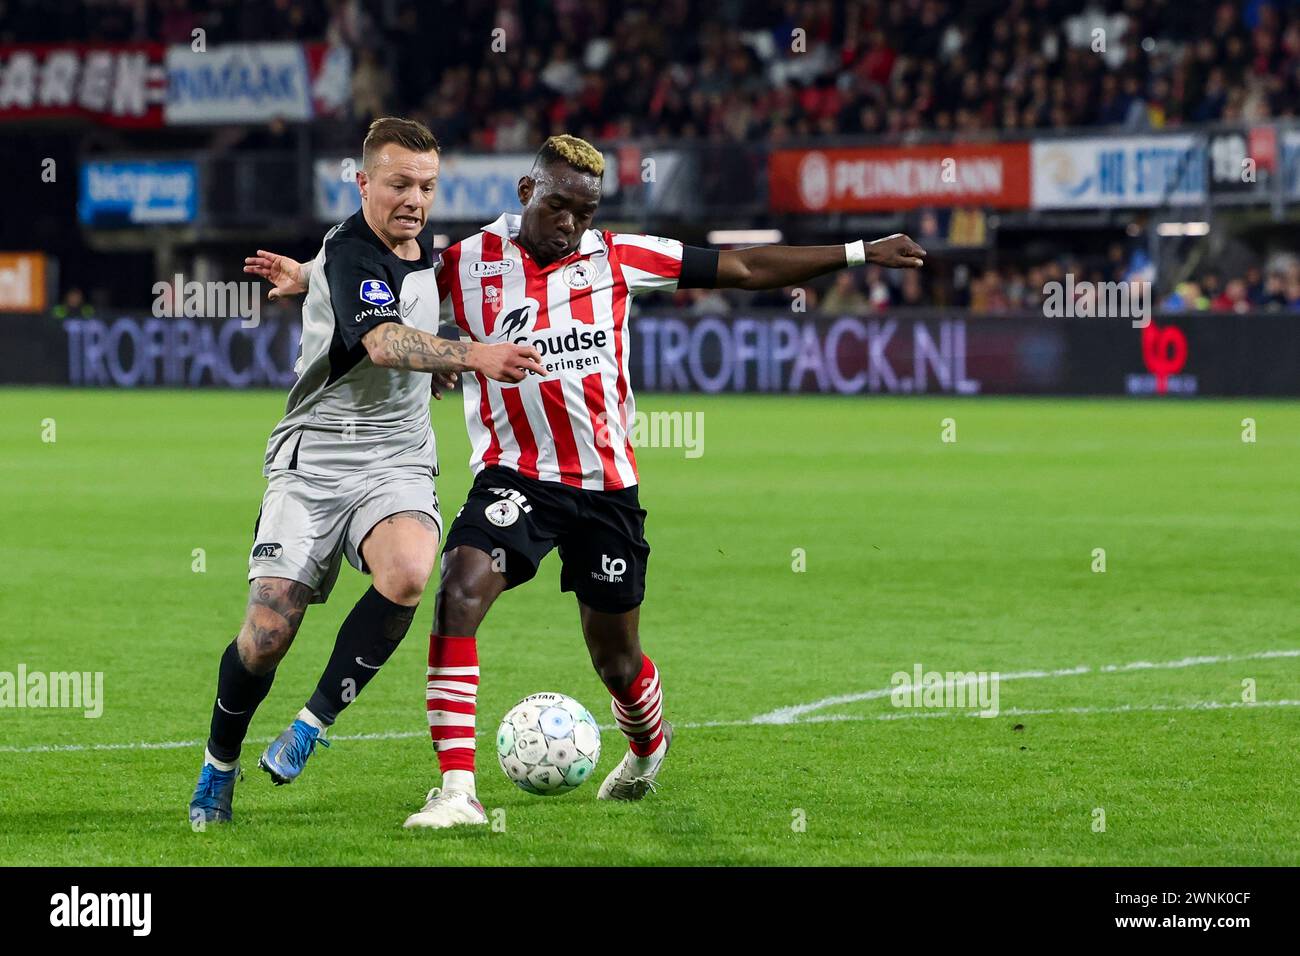 ROTTERDAM, NETHERLANDS - MARCH 2: Jordy Clasie (AZ Alkmaar) and Joshua Kitolano (Sparta Rotterdam) Battles for the ball during the Eredivisie match of Stock Photo